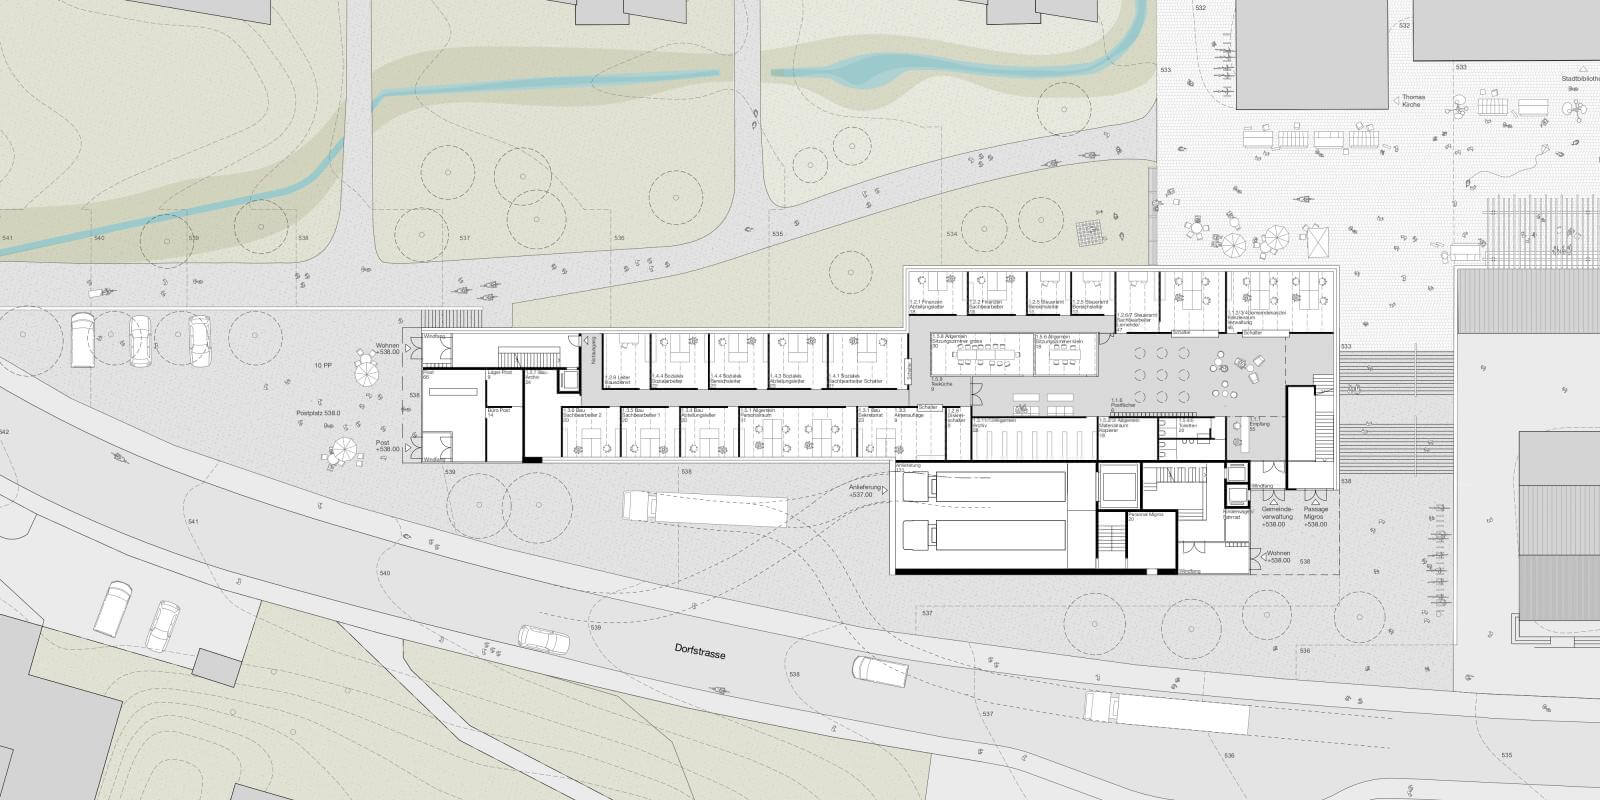 Centre development and municipal administration, Adligenswil (2019). Ground floor plan ground with surroundings.